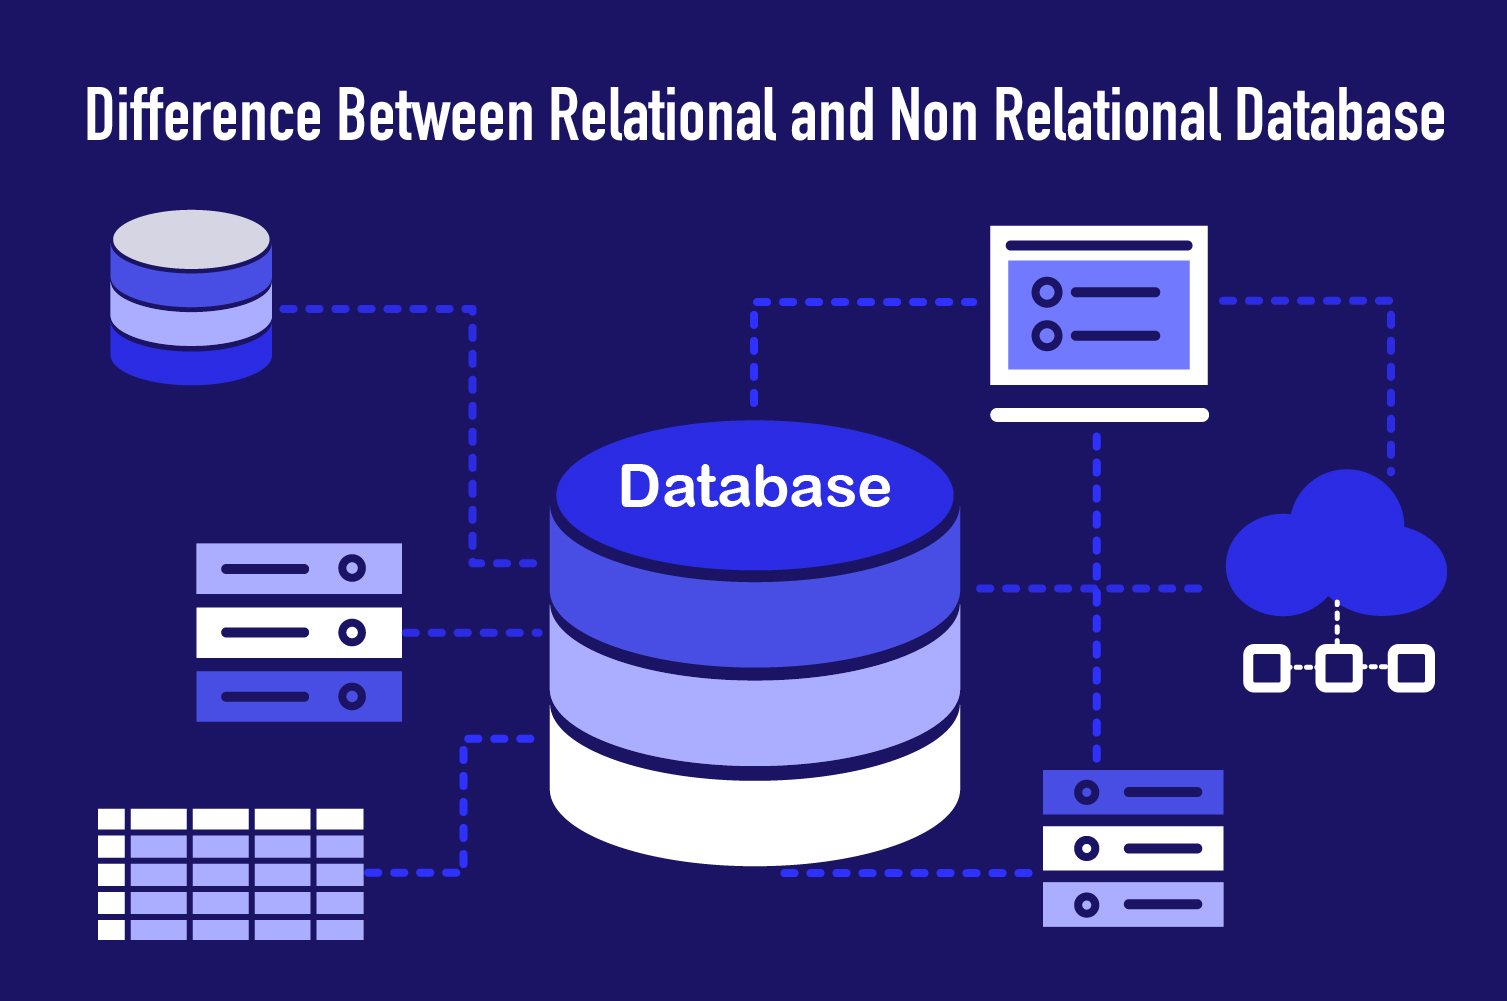 Difference Between Relational and Non Relational Database